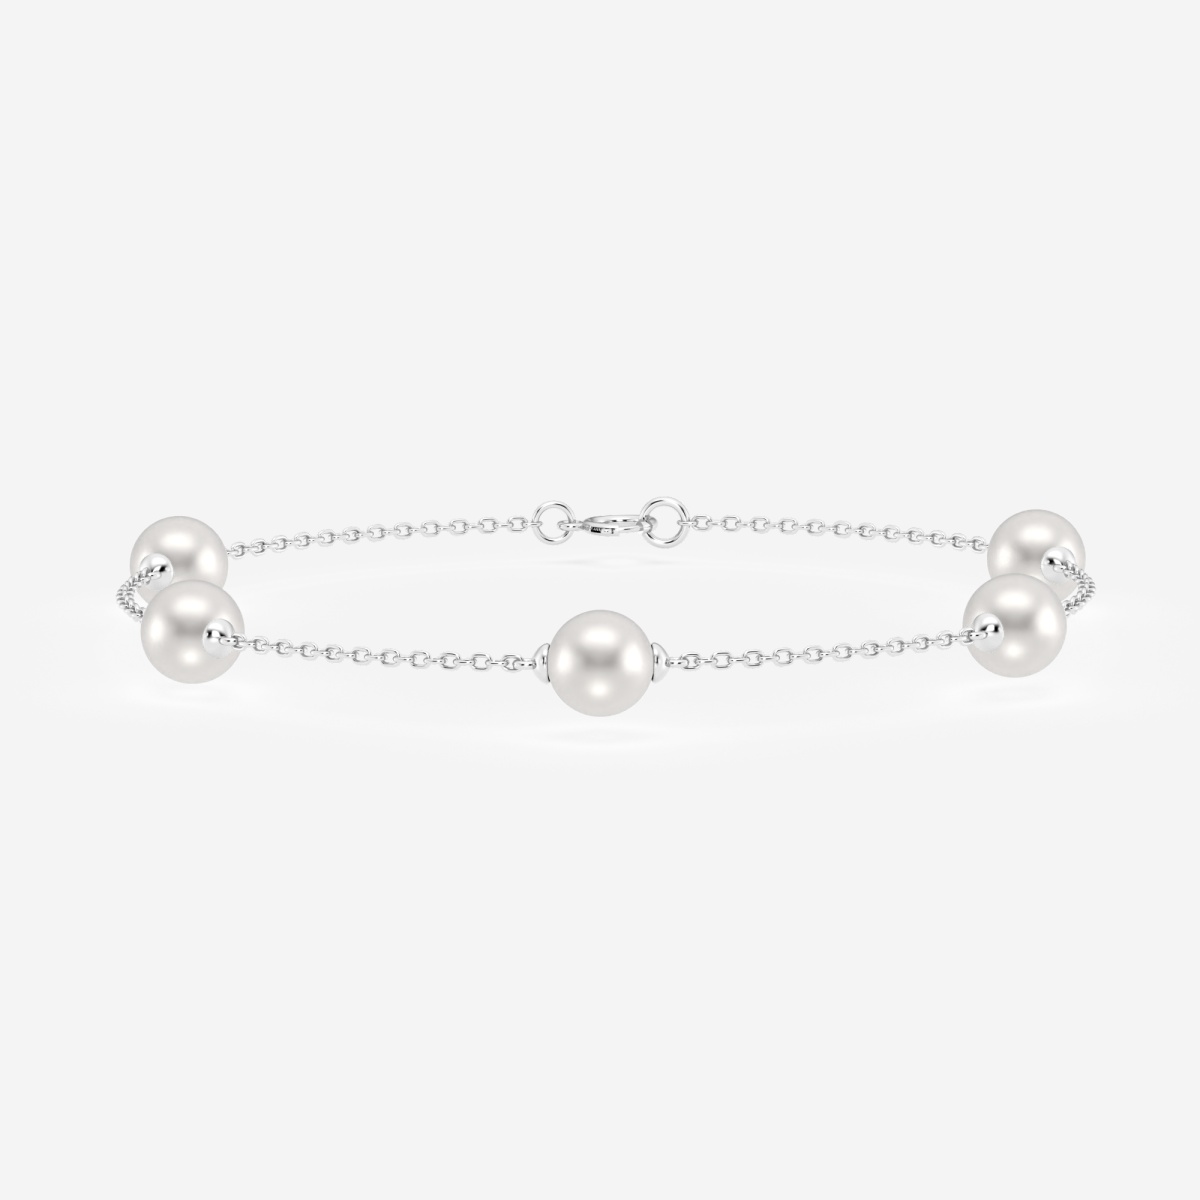 5.5 - 6.0 mm Cultured Freshwater Pearl Station Chain Bracelet - 7 Inches